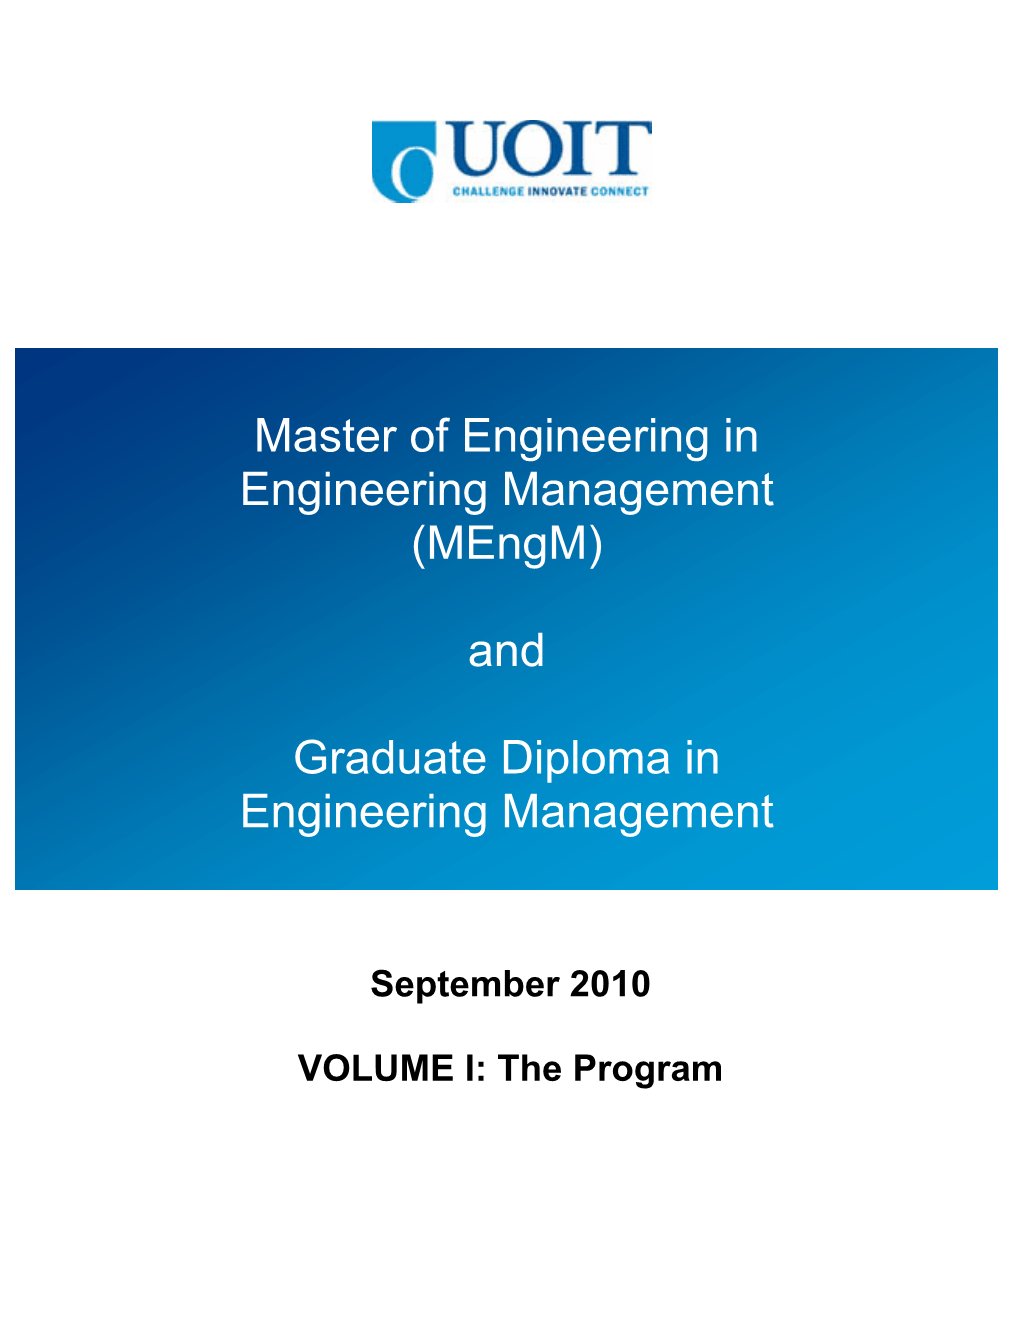 (Mengm) and Graduate Diploma in Engineering Management